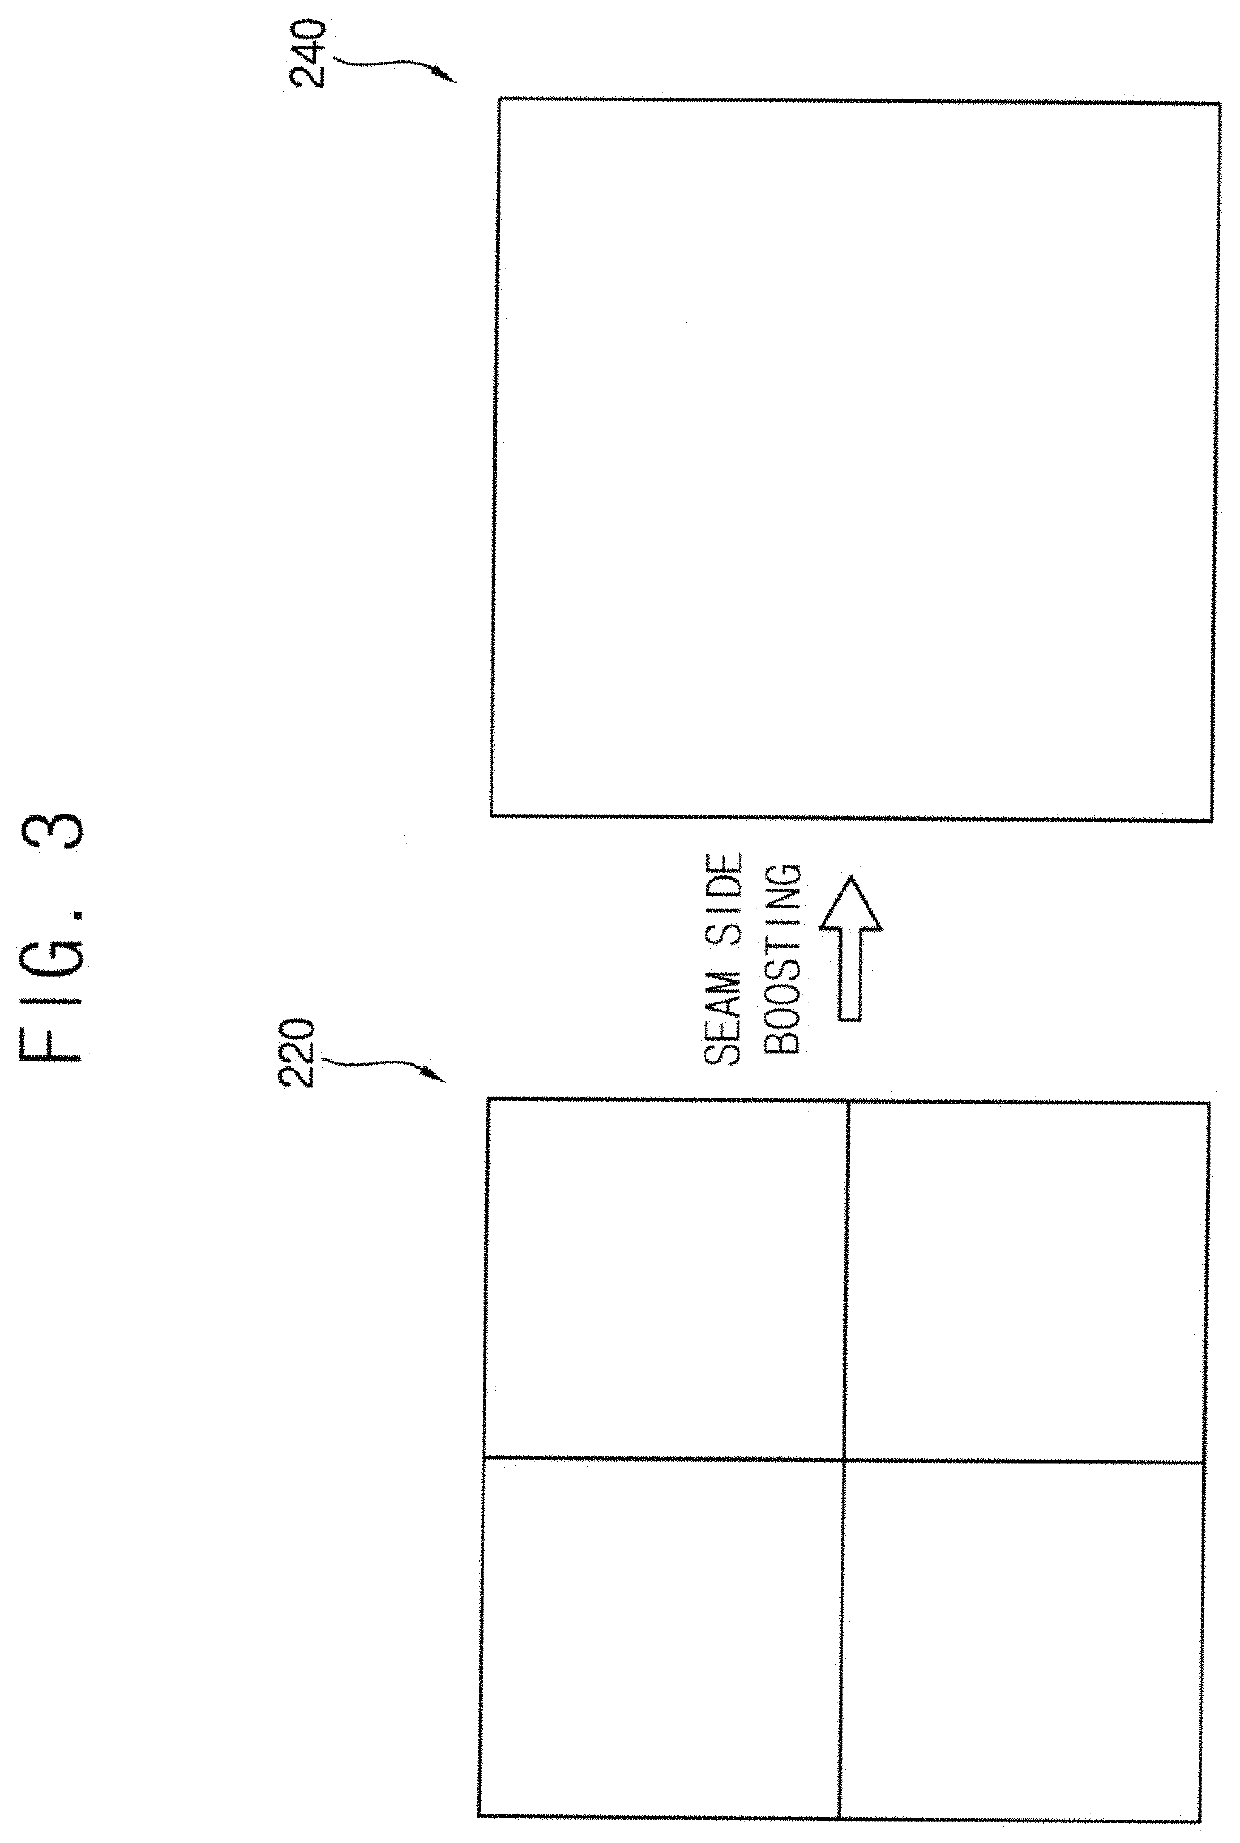 Tiled display device having a plurality of display panels